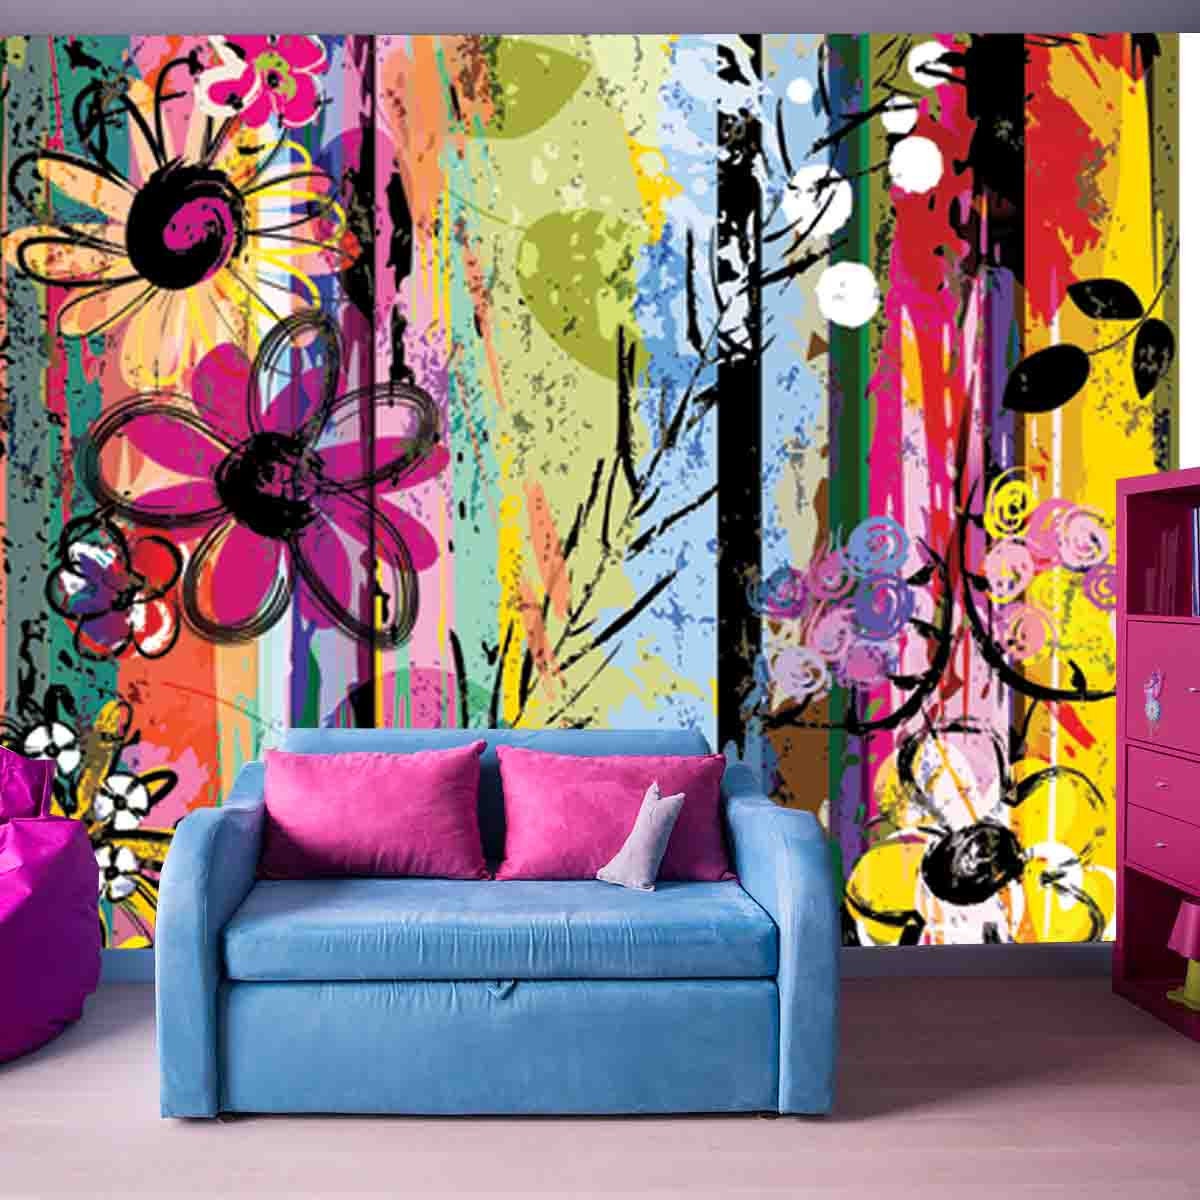 Abstract Background Composition with Flowers and Splashes Wallpaper Teen Girl Bedroom Mural